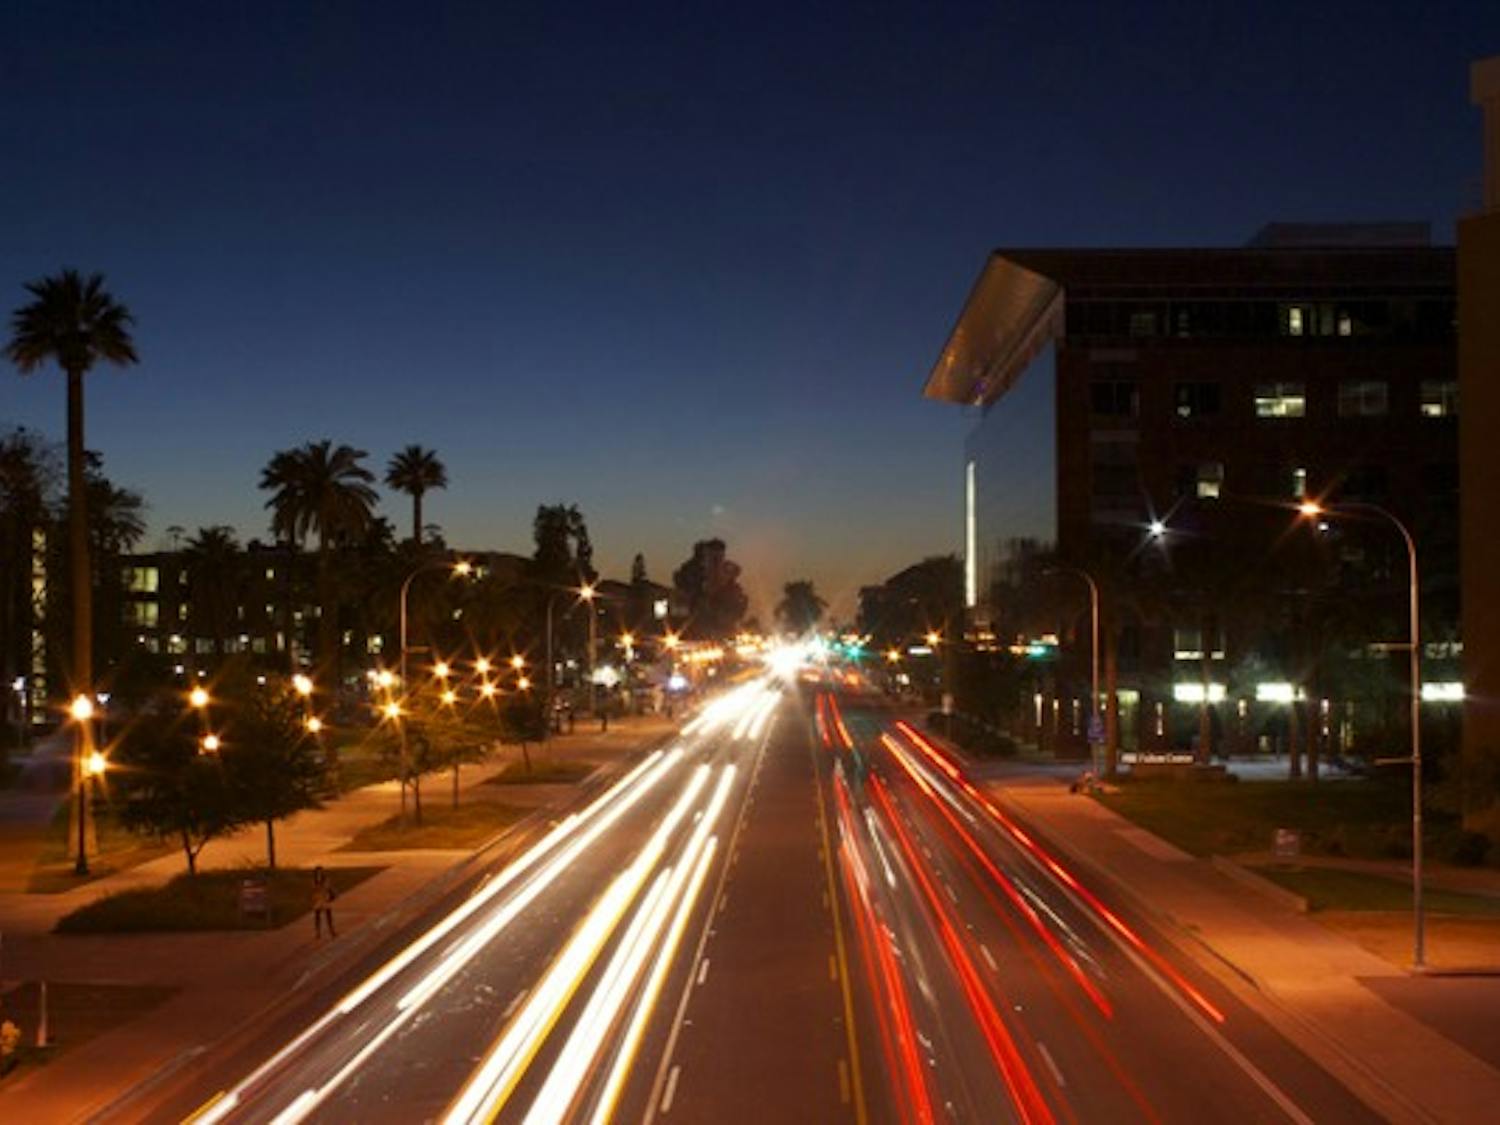 CITY LIGHTS: Cars travel down University Drive, one of the busiest streets in Tempe.  Bloomberg Businessweek named Tempe the third most "fun affordable" city. (Photo by Lisa Bartoli)